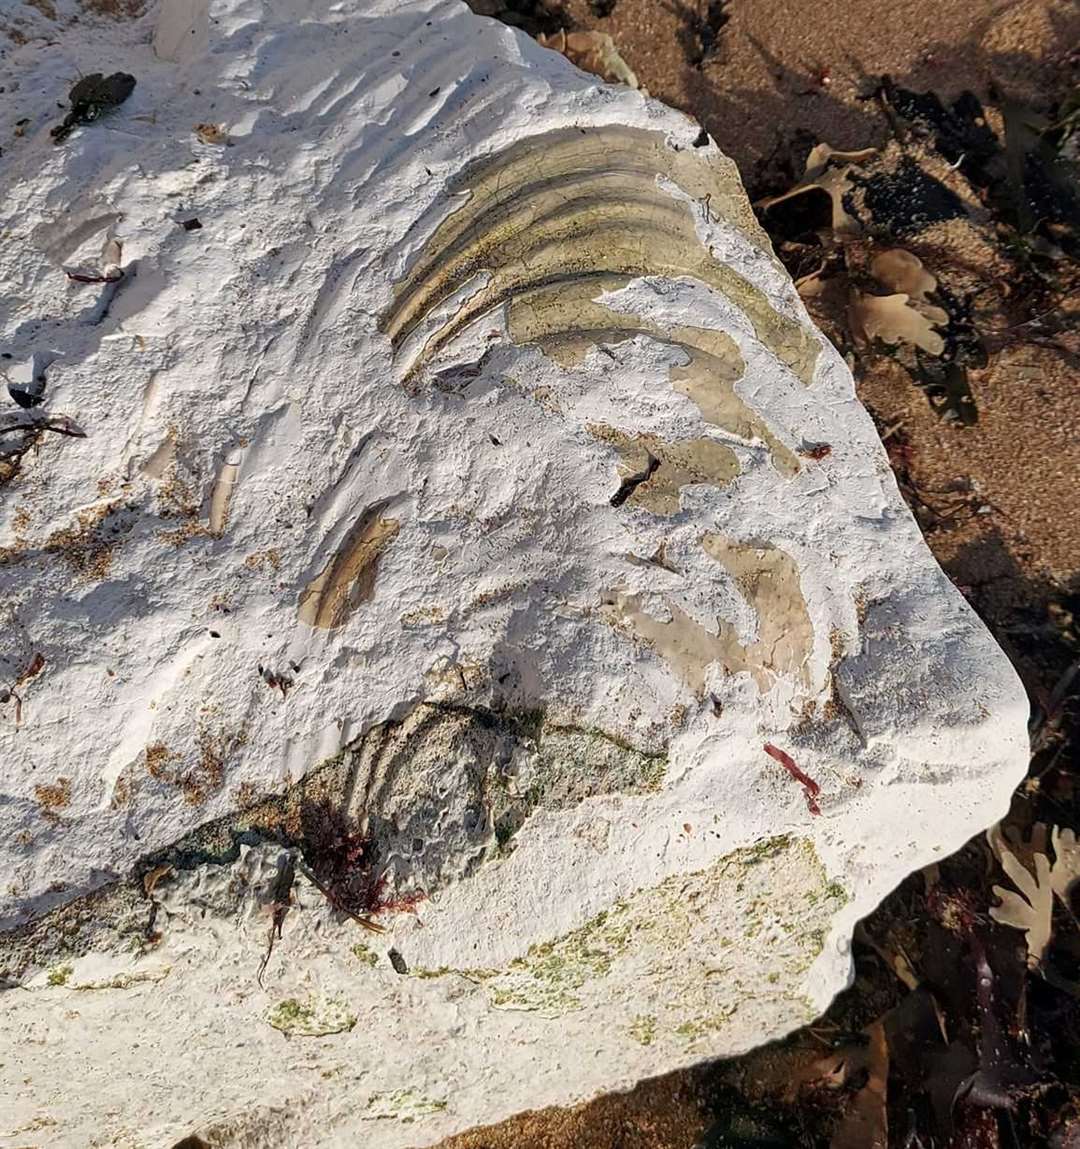 A beach-goer believes they spotted a fossil in the chalk following a cliff fall in Dumpton Gap. Picture: Chris Cove